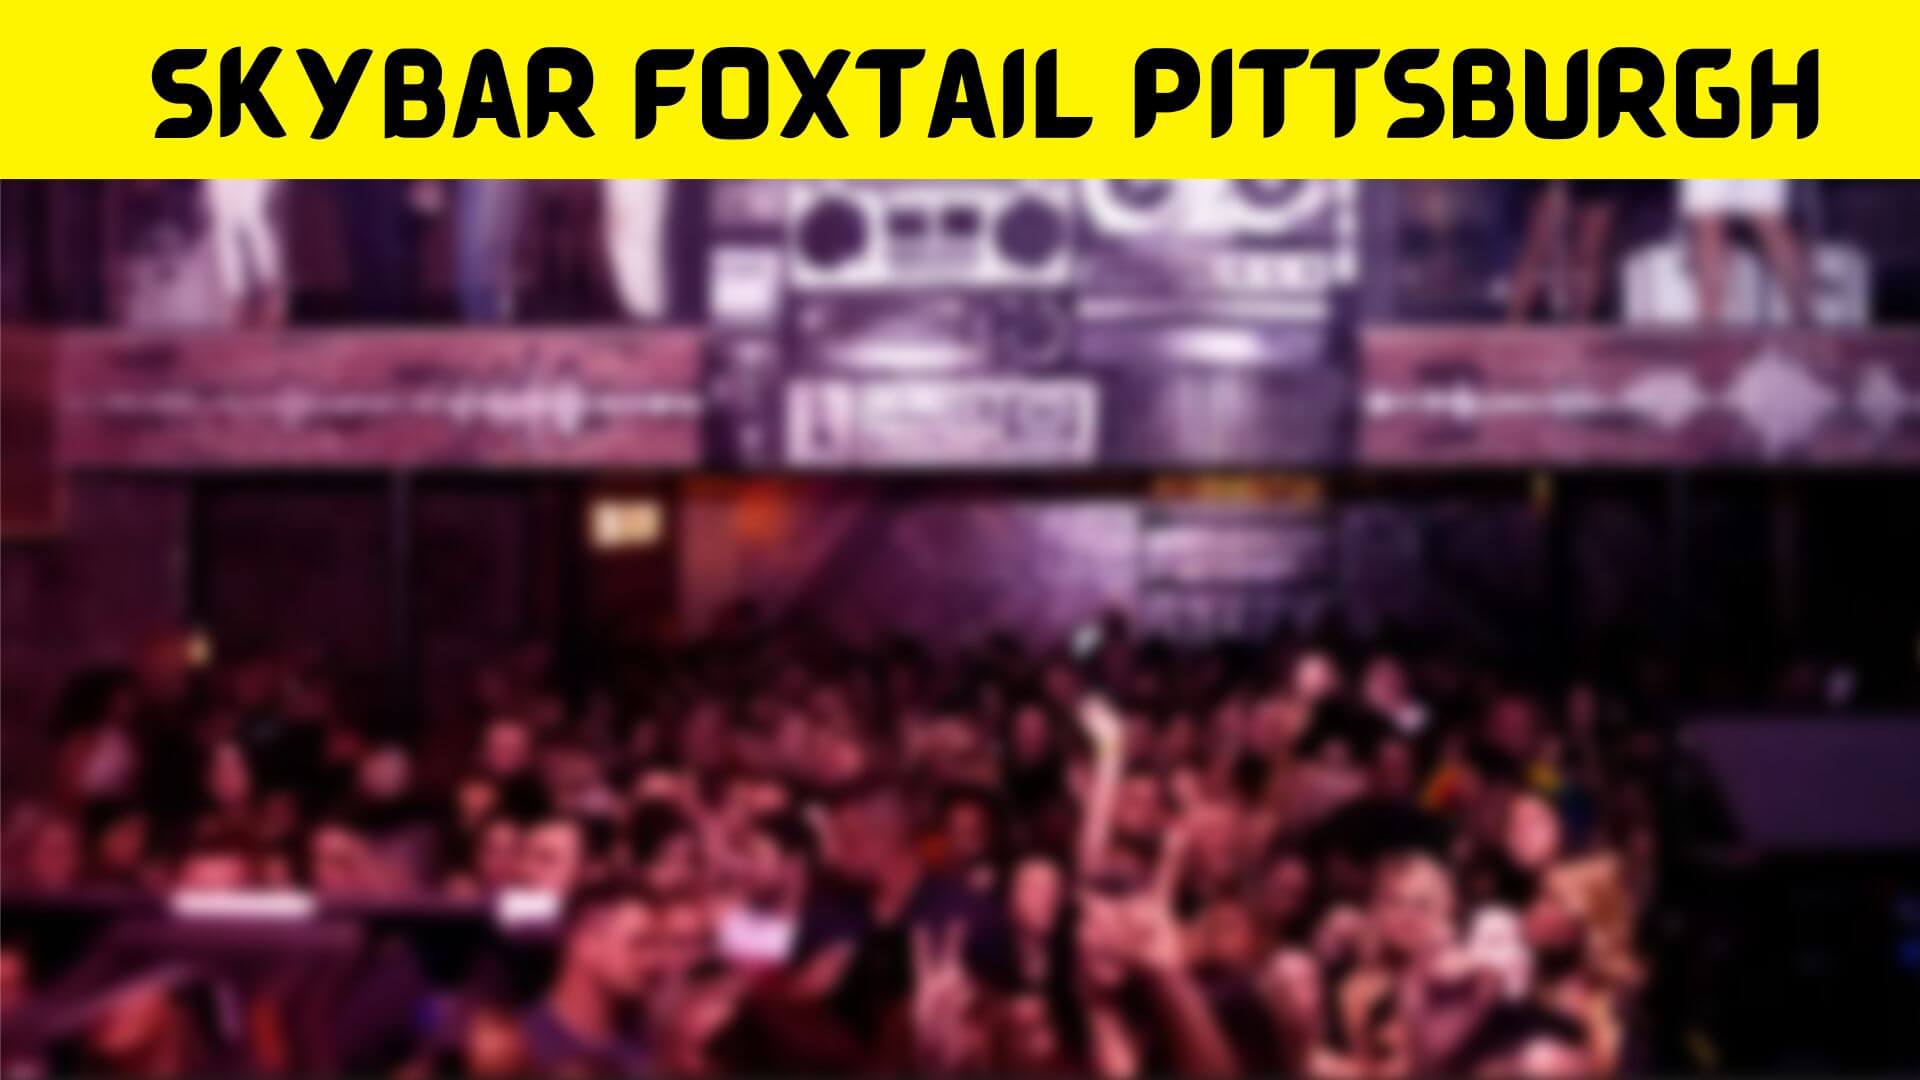 Skybar Foxtail Pittsburgh